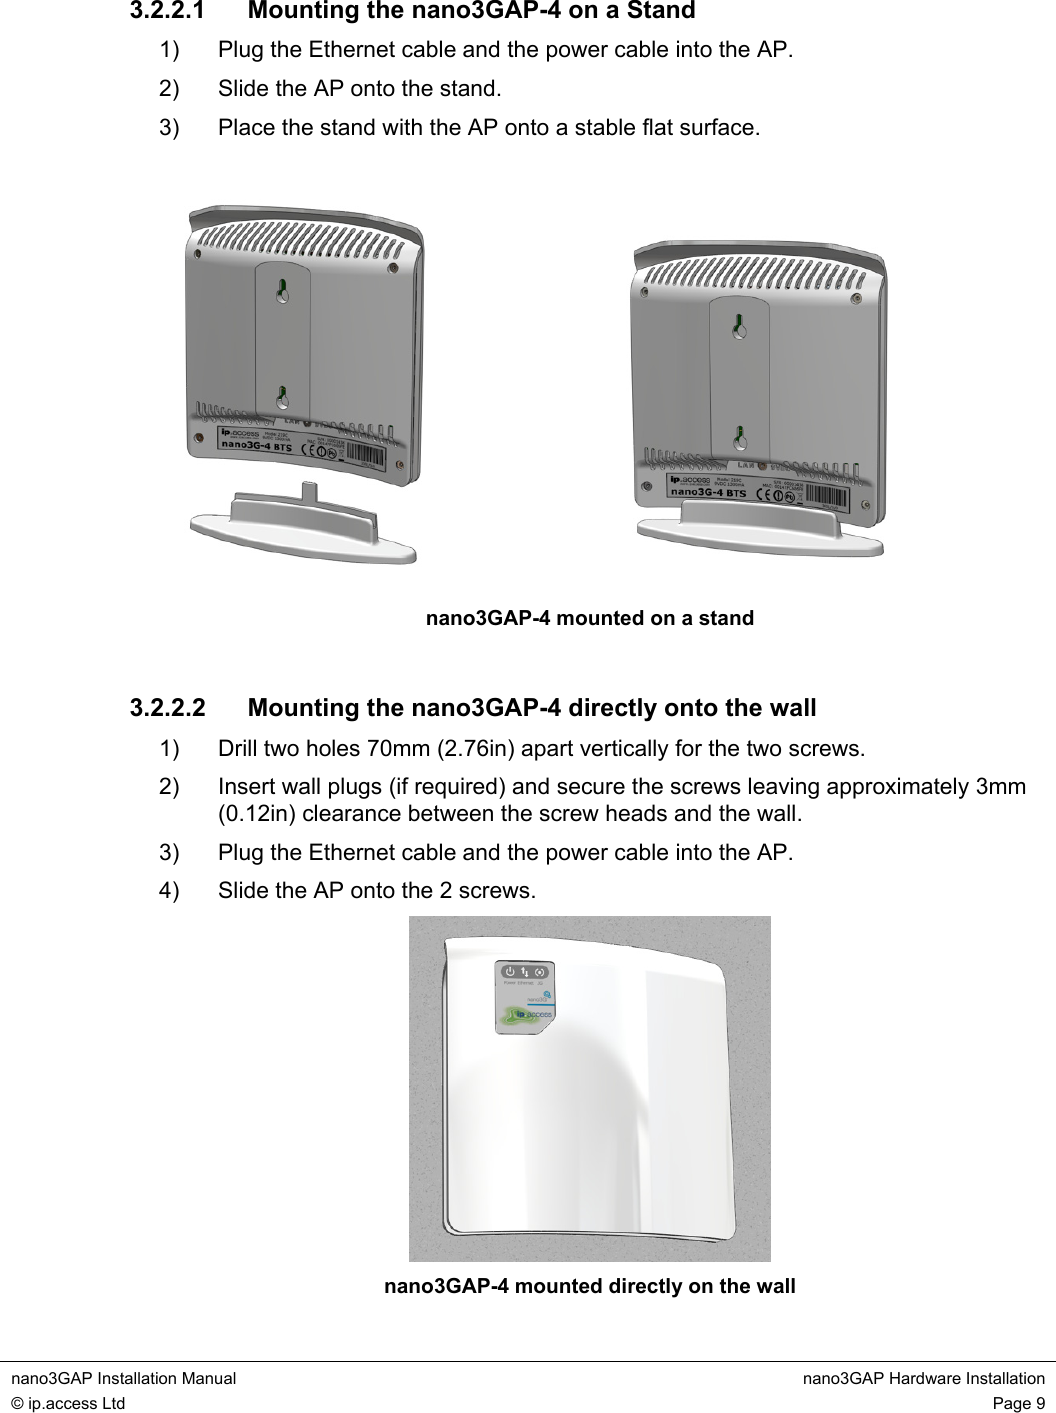  nano3GAP Installation Manual  nano3GAP Hardware Installation © ip.access Ltd  Page 9  3.2.2.1 Mounting the nano3GAP-4 on a Stand 1)  Plug the Ethernet cable and the power cable into the AP. 2)  Slide the AP onto the stand. 3)  Place the stand with the AP onto a stable flat surface.    nano3GAP-4 mounted on a stand  3.2.2.2  Mounting the nano3GAP-4 directly onto the wall 1)  Drill two holes 70mm (2.76in) apart vertically for the two screws. 2)  Insert wall plugs (if required) and secure the screws leaving approximately 3mm (0.12in) clearance between the screw heads and the wall. 3)  Plug the Ethernet cable and the power cable into the AP. 4)  Slide the AP onto the 2 screws.  nano3GAP-4 mounted directly on the wall 